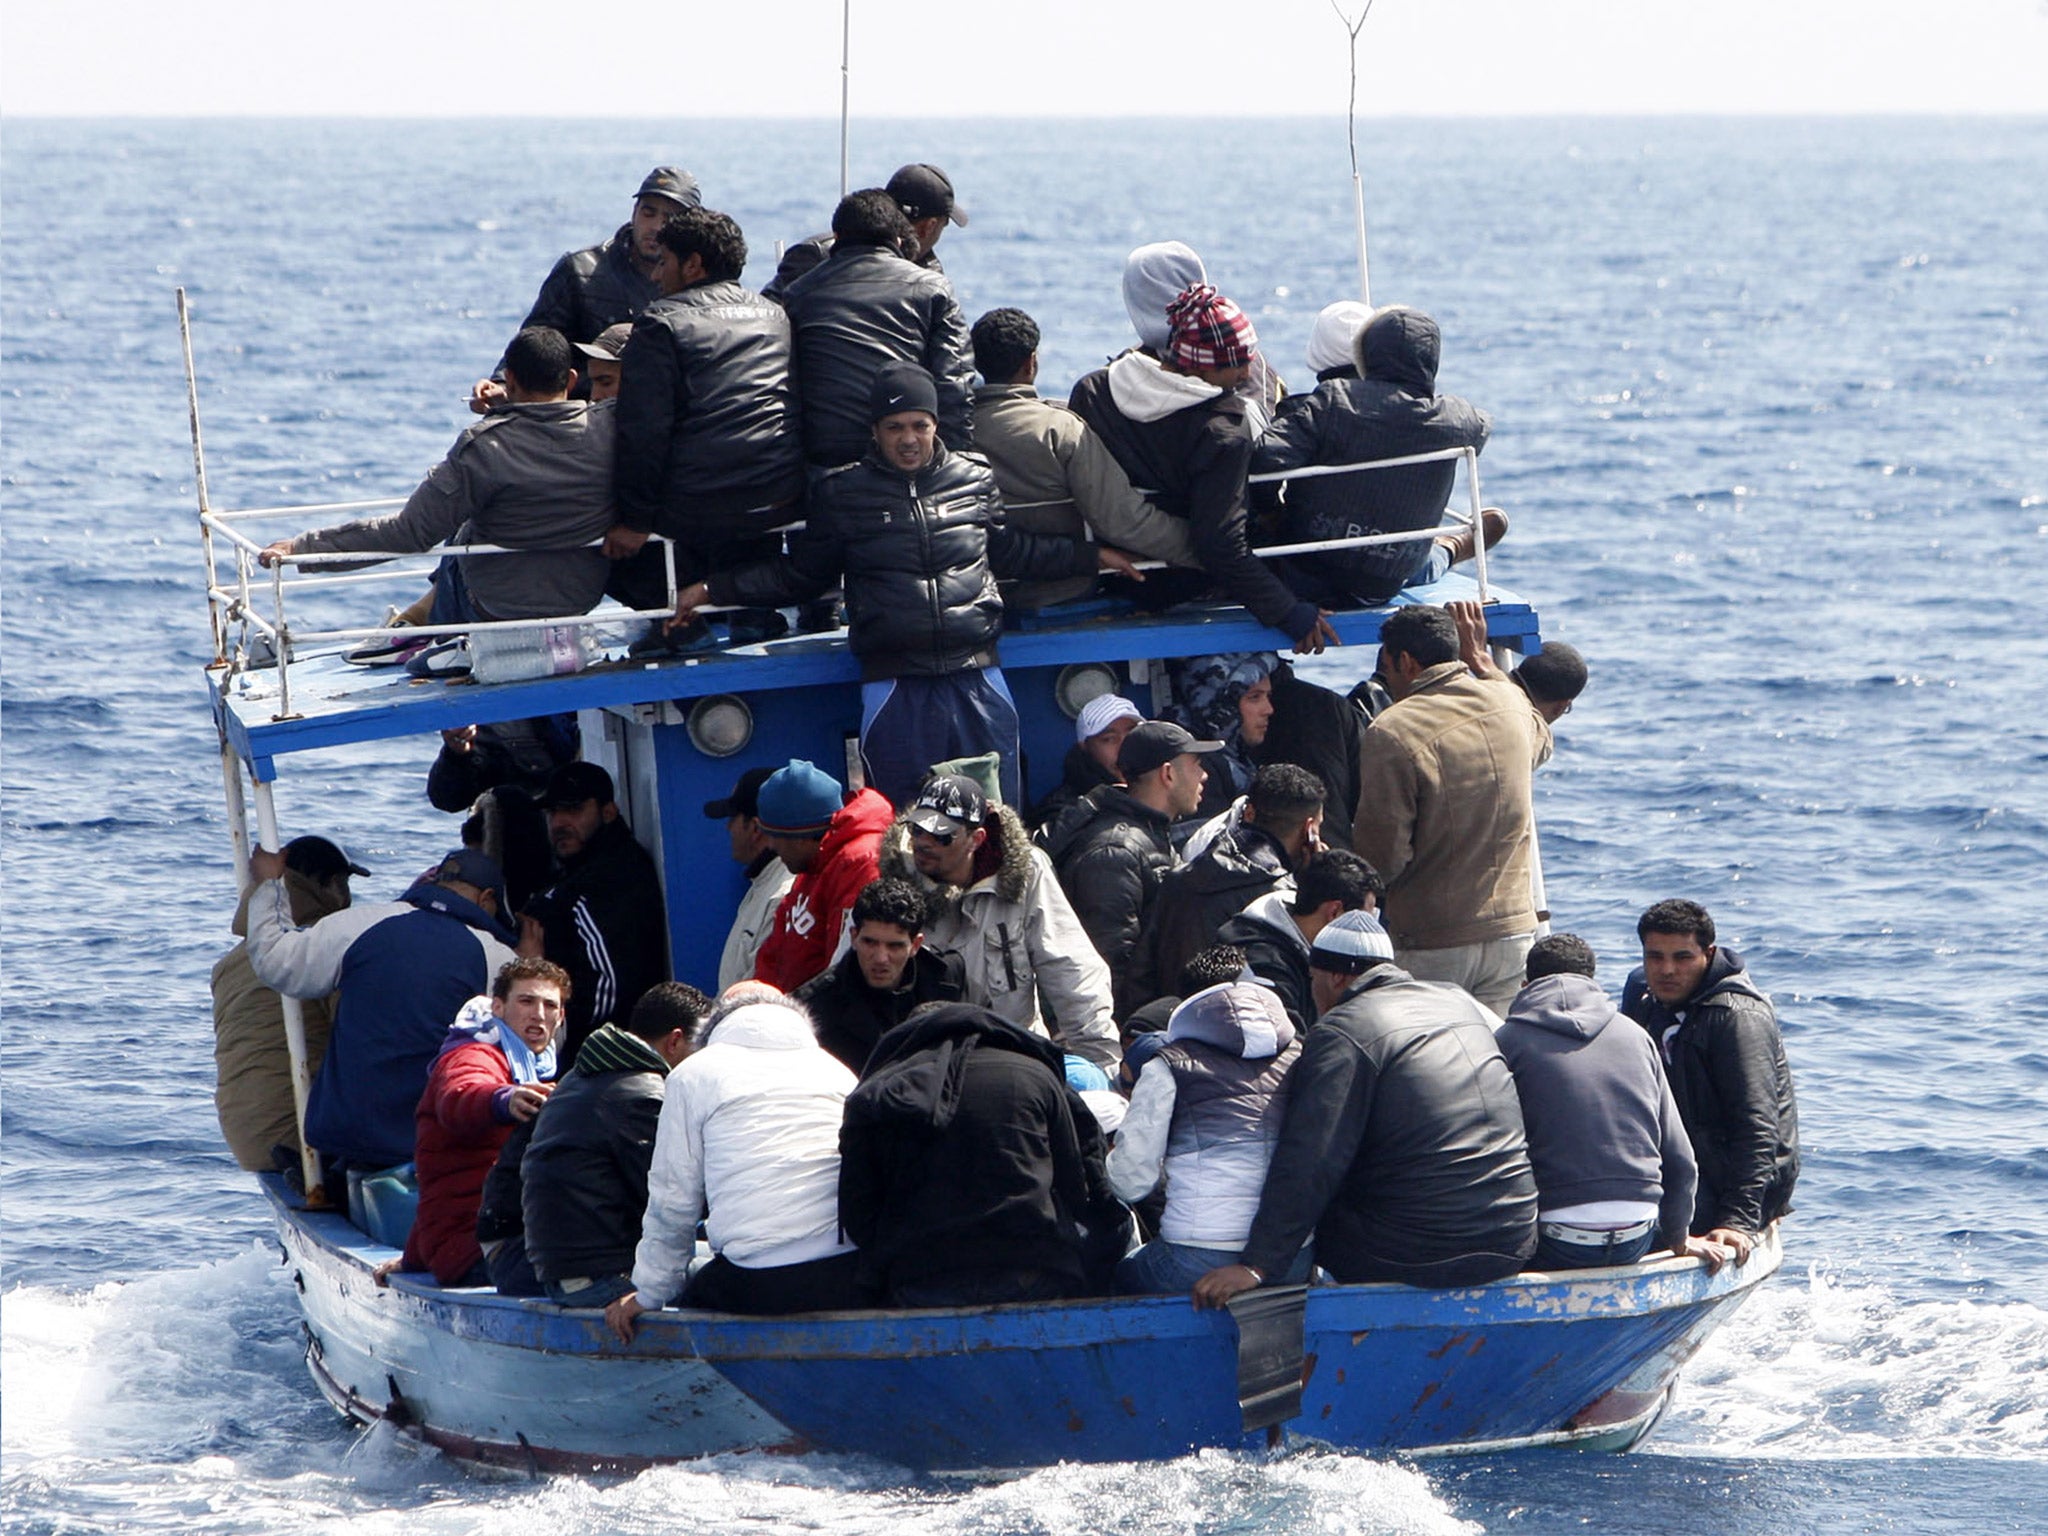 An Isis militant has outlined a plan to use migrant boats to launch attacks into Europe